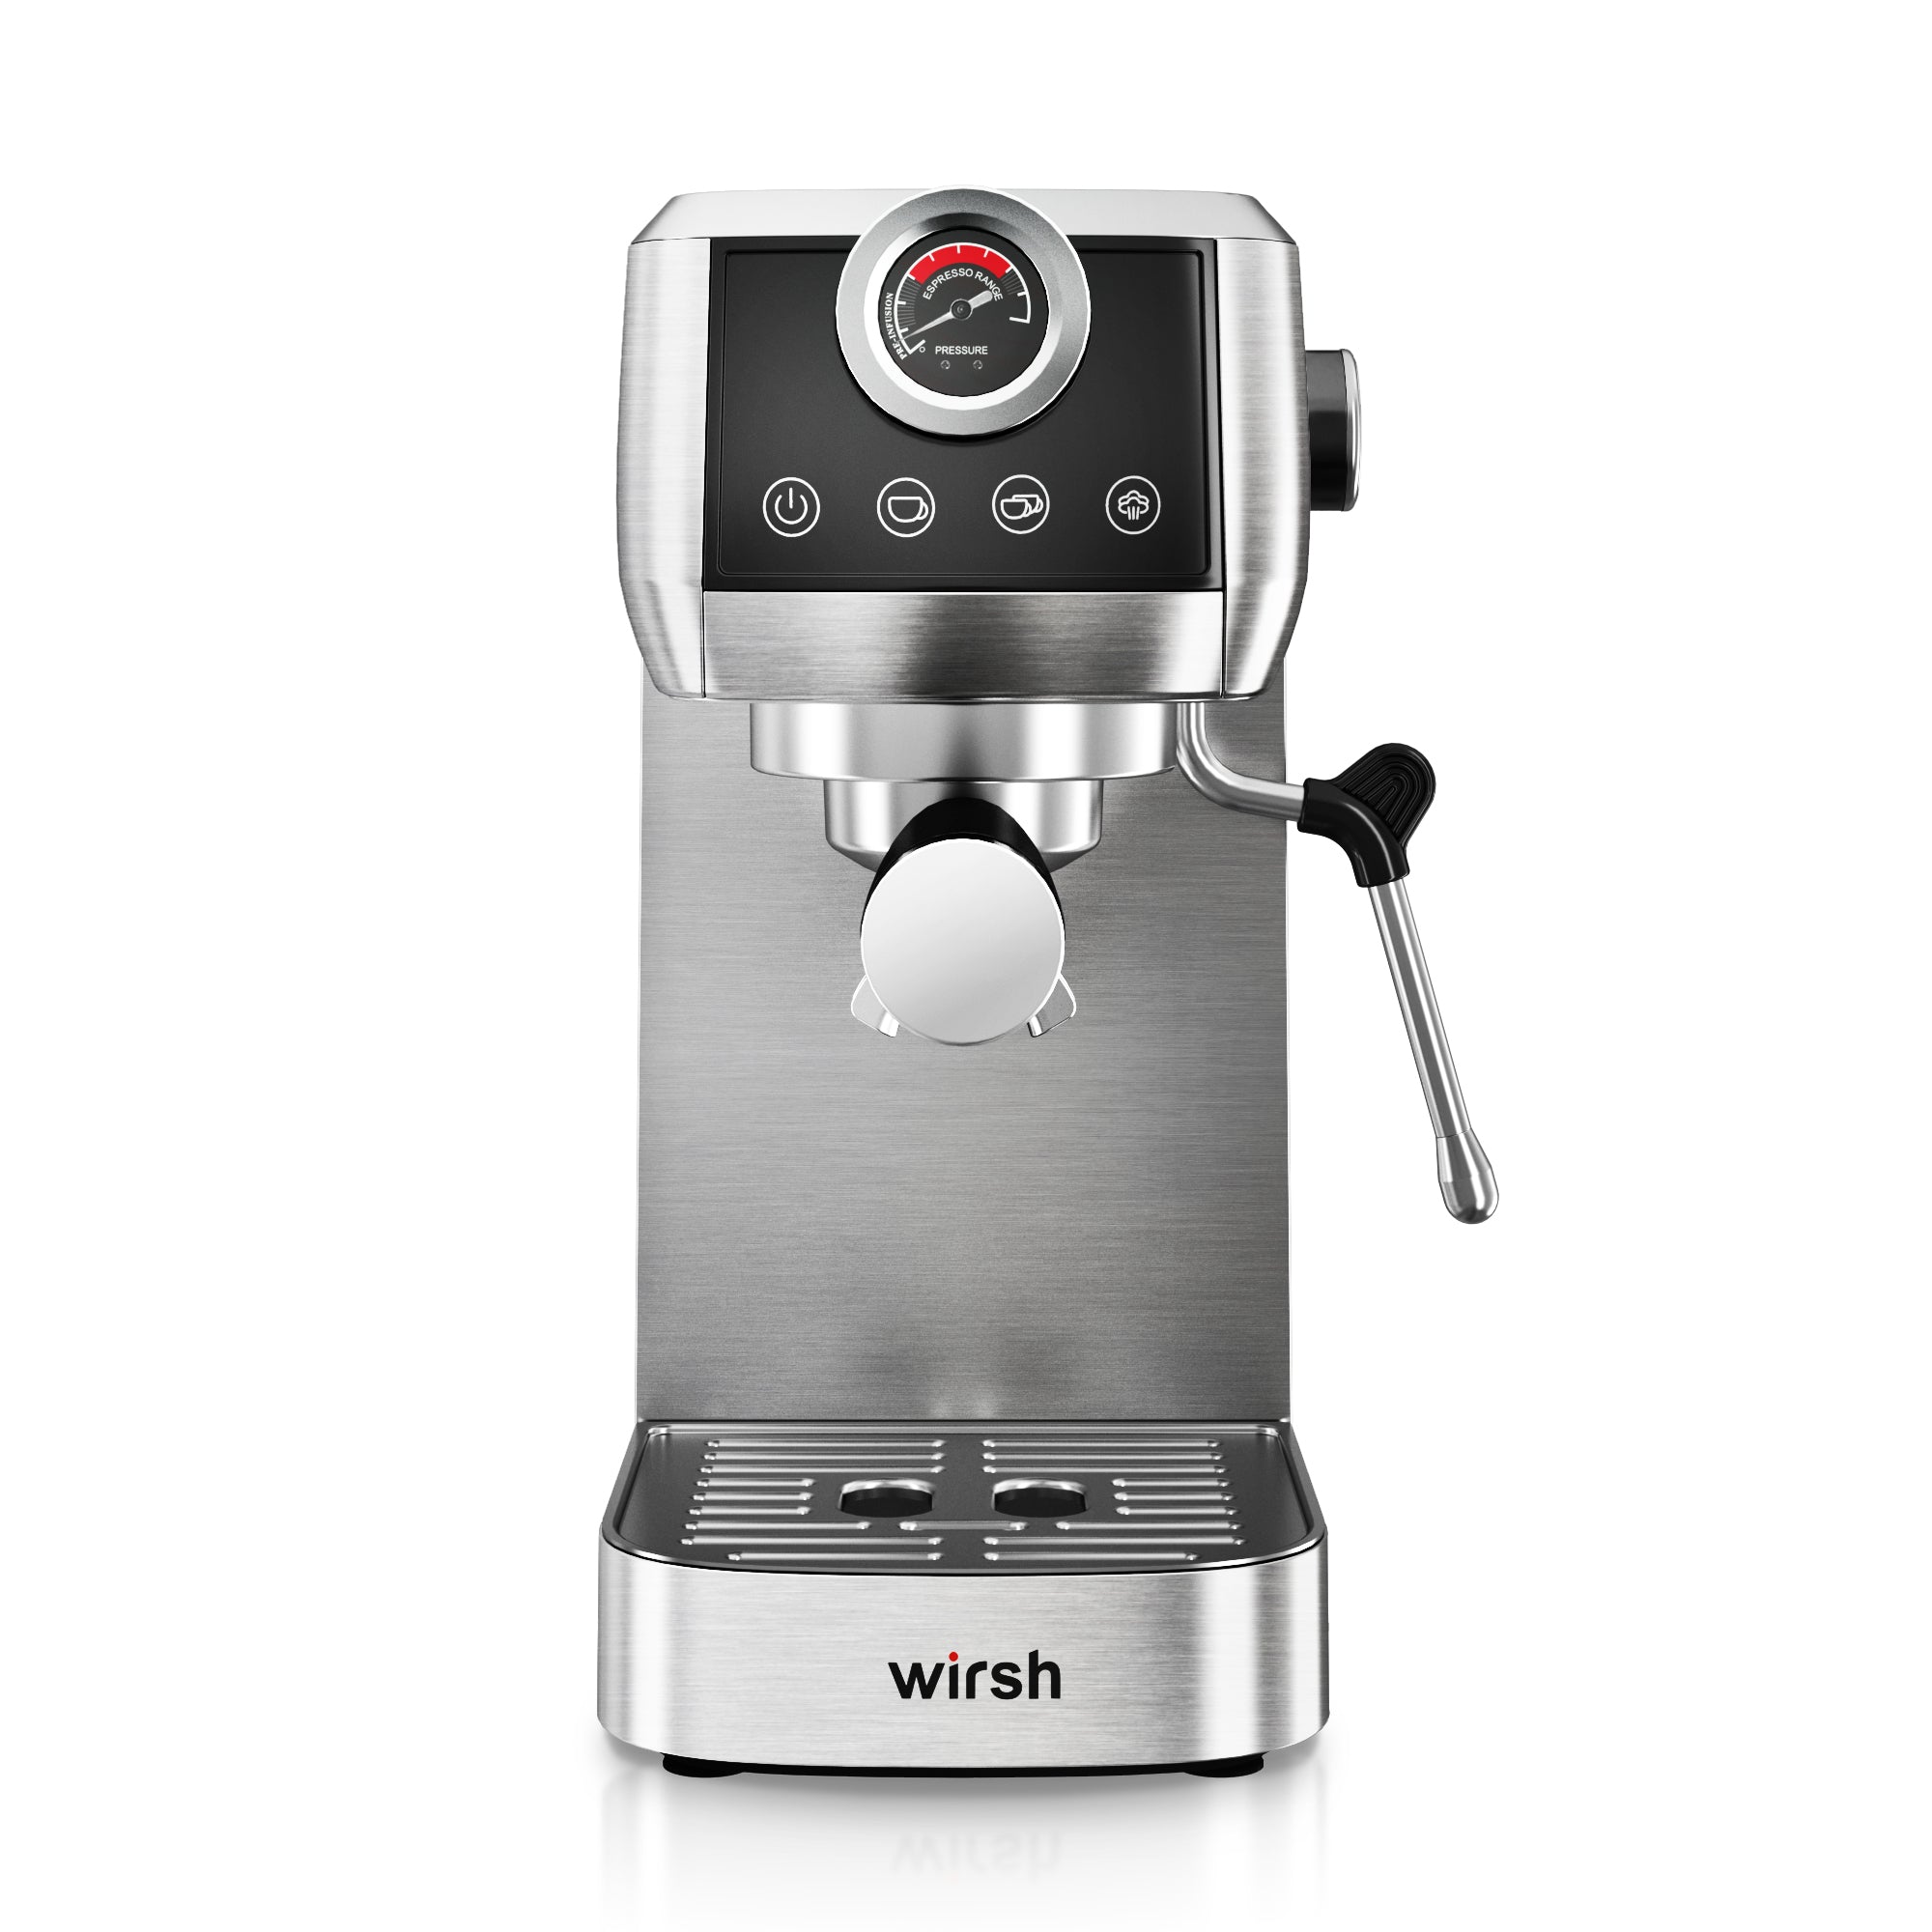  wirsh Espresso Machine, 20 Bar Espresso Maker with Plastic Free  Portafitler and Steamer for Latte and Cappuccino,Expresso Coffee Machine  with Pressure Gauge,Touch Screen (Home Barista Plus): Home & Kitchen